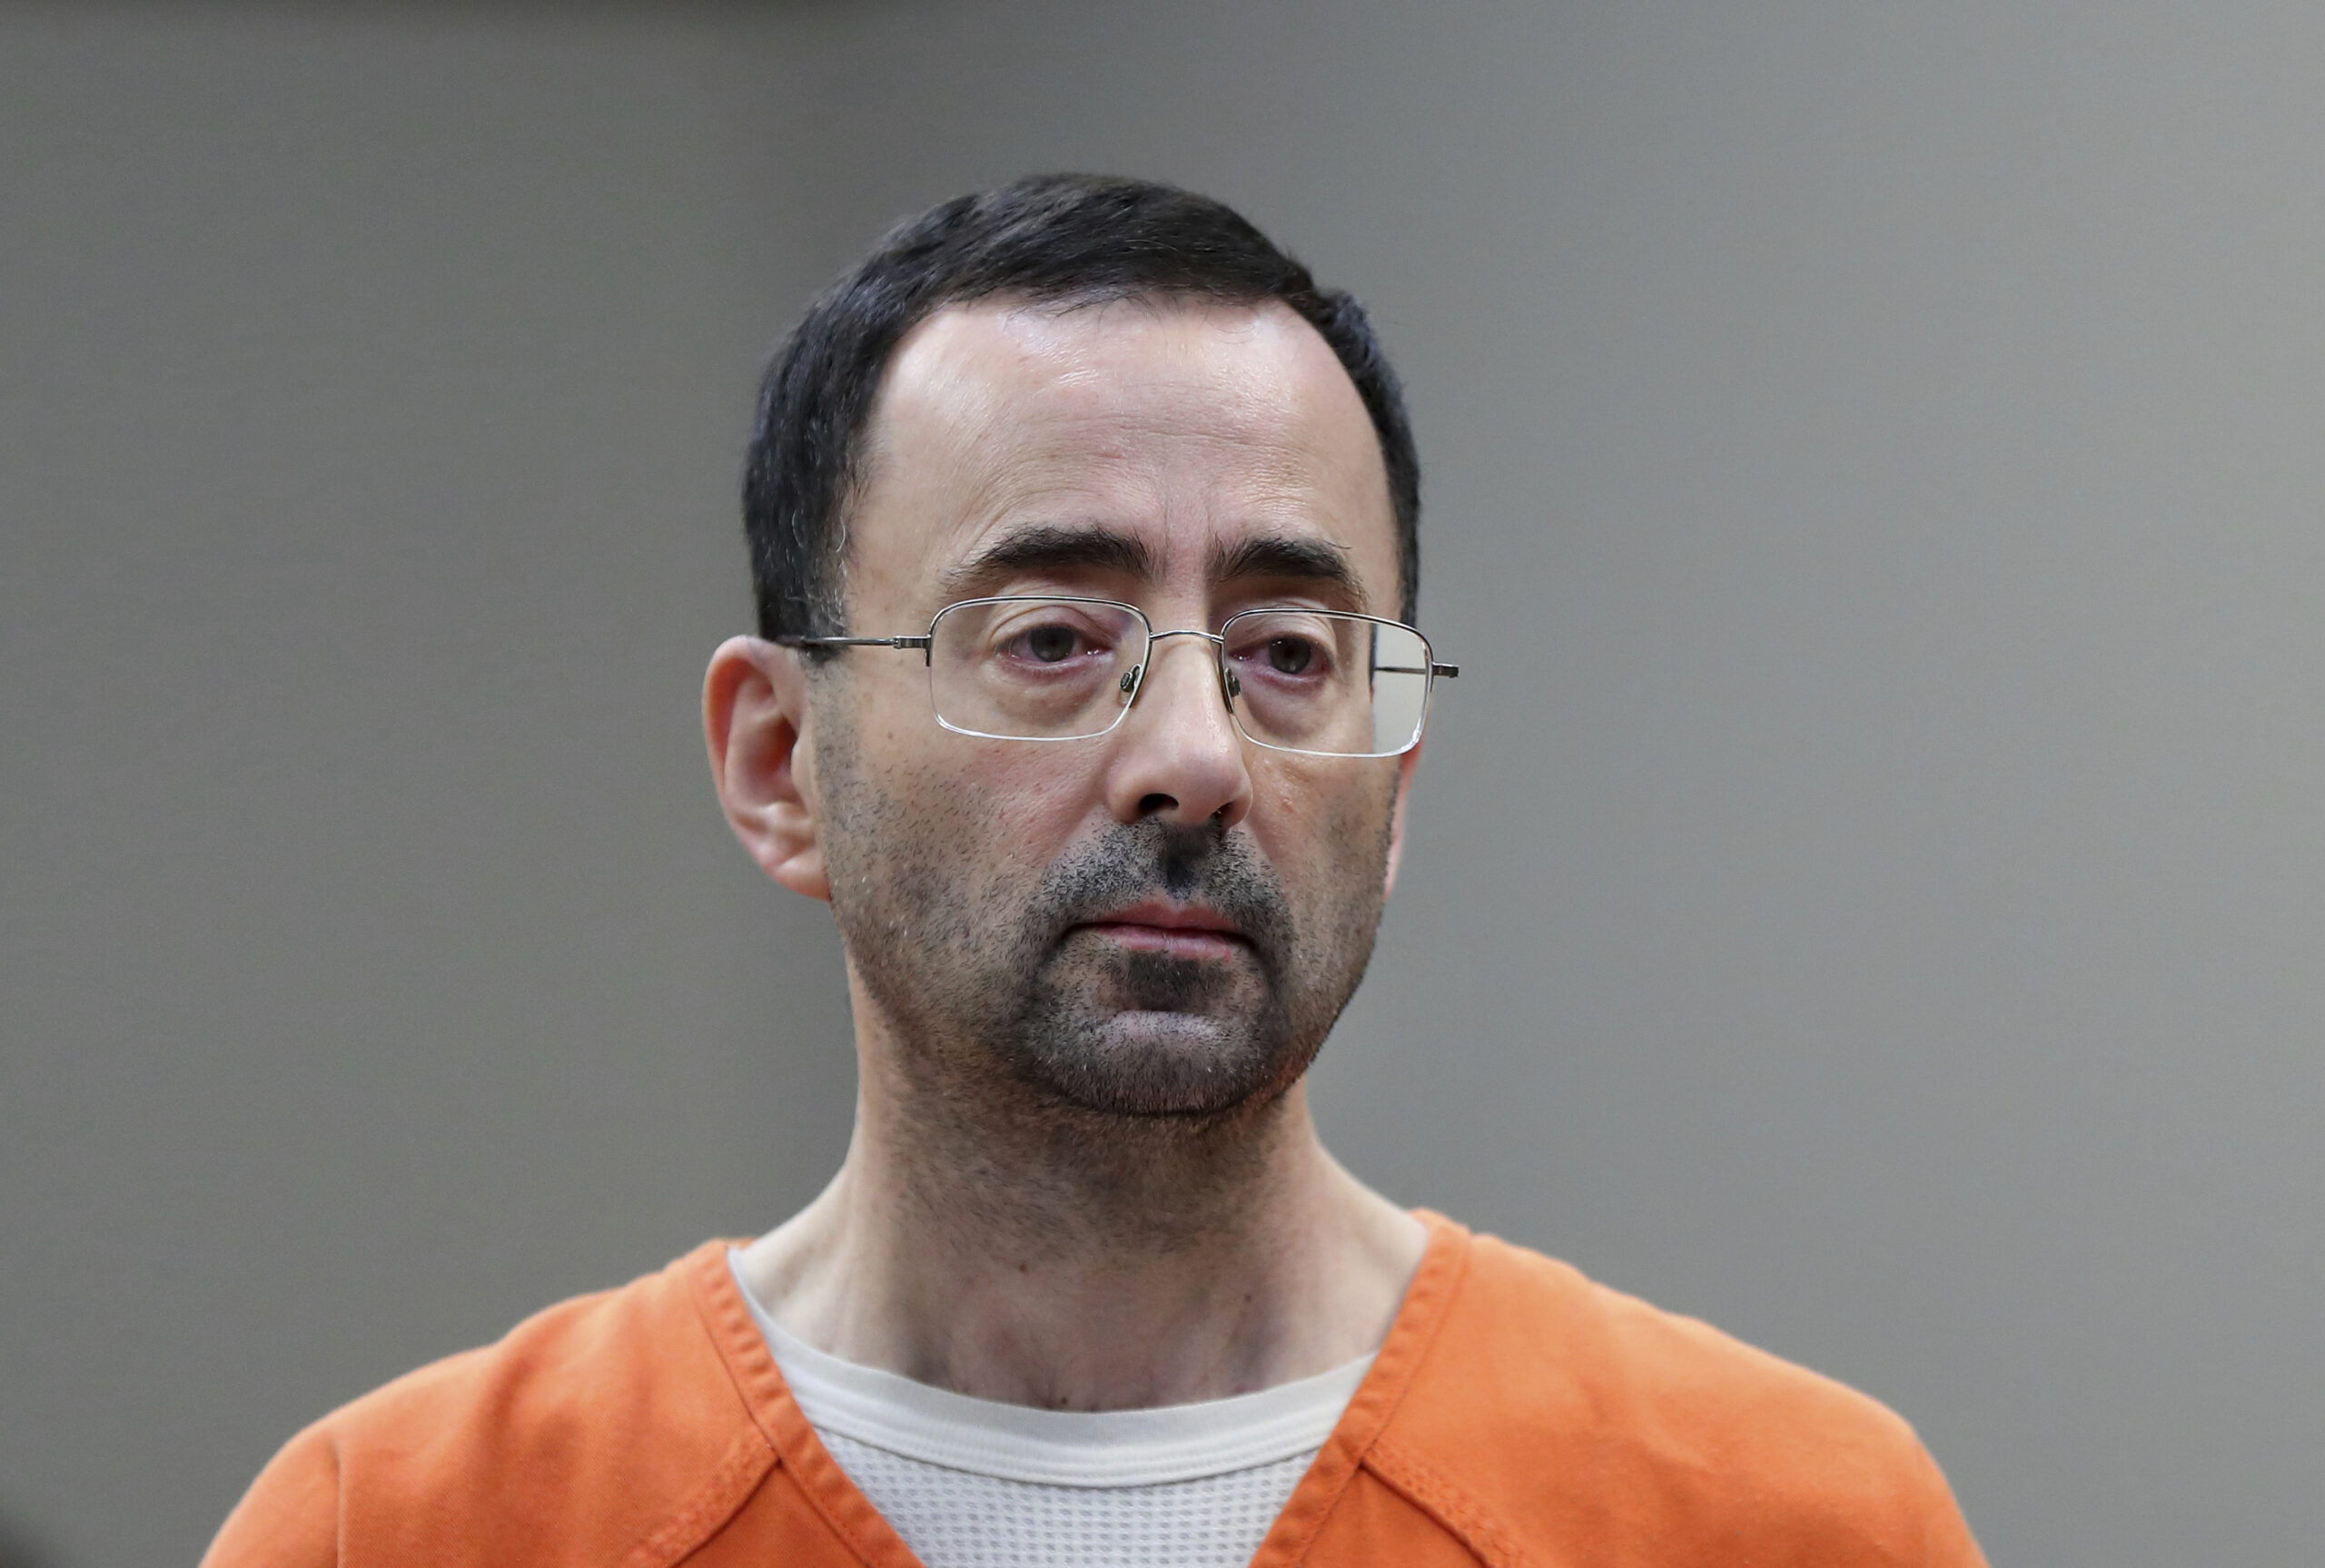 FILE - Dr. Larry Nassar, appears in court for a plea hearing on Nov. 22, 2017, in Lansing, Mich. The U.S. Justice Department said Thursday, May 26, 2022 it will not pursue criminal charges against former FBI agents who failed to quickly open an investigation of sports doctor Larry Nassar despite learning in 2015 that he was accused of sexually assaulting female gymnasts.(. (AP Photo/Paul Sancya File)